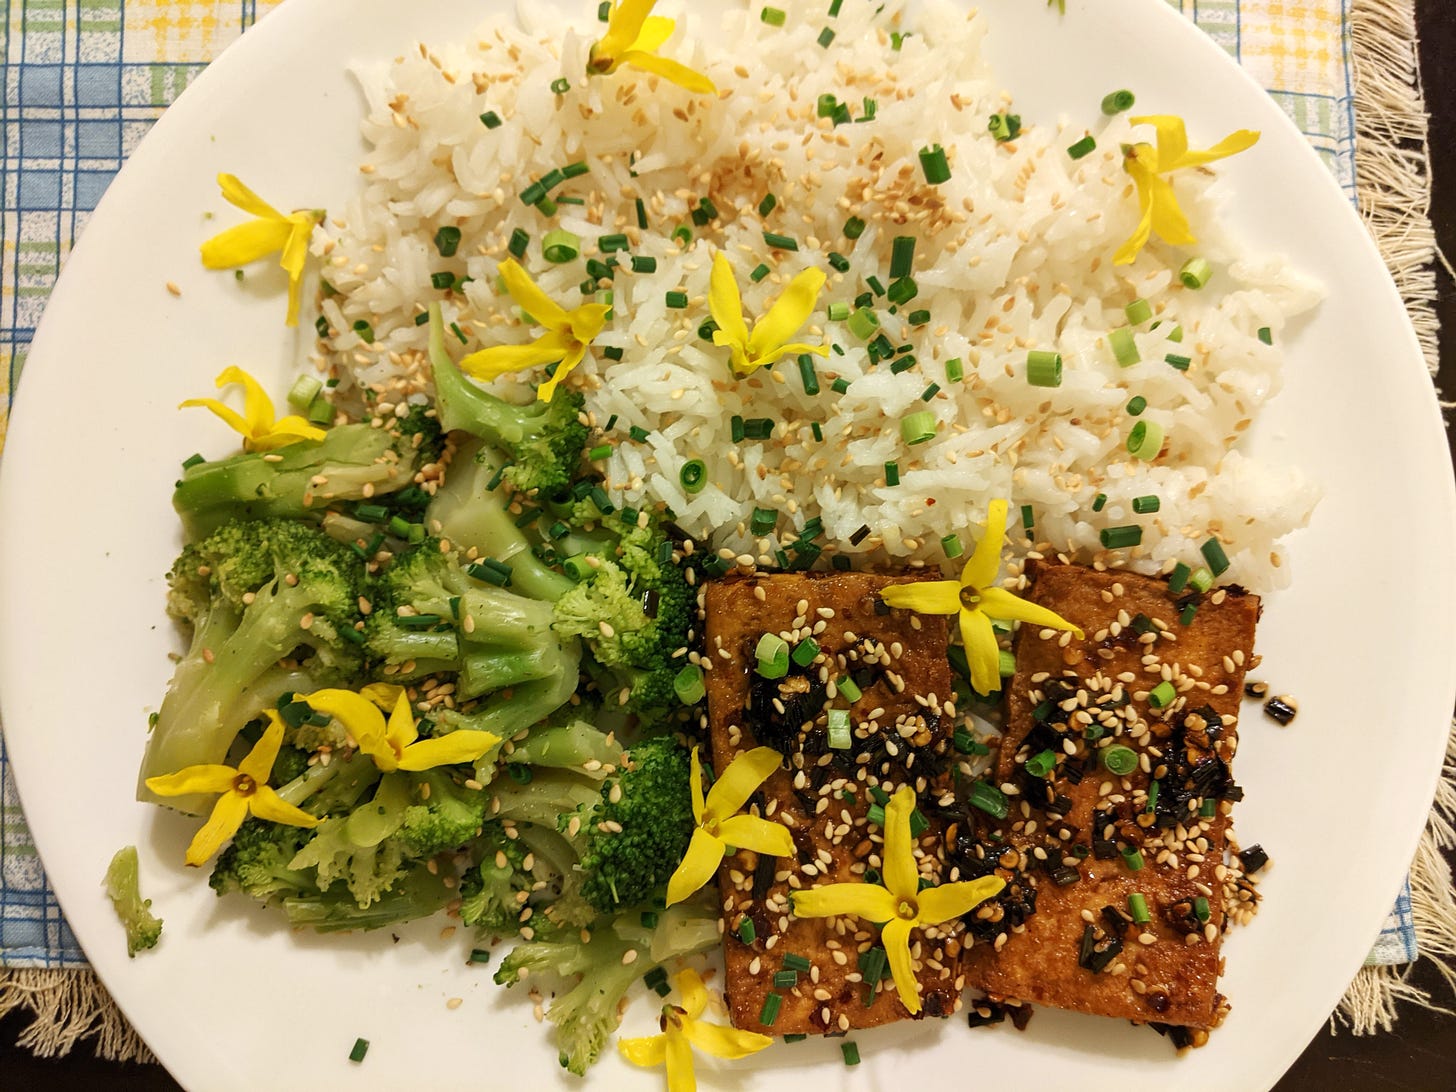 A plate with rice, broccoli, and tofu garnished with sesame seeds, field garlic, and flowers.